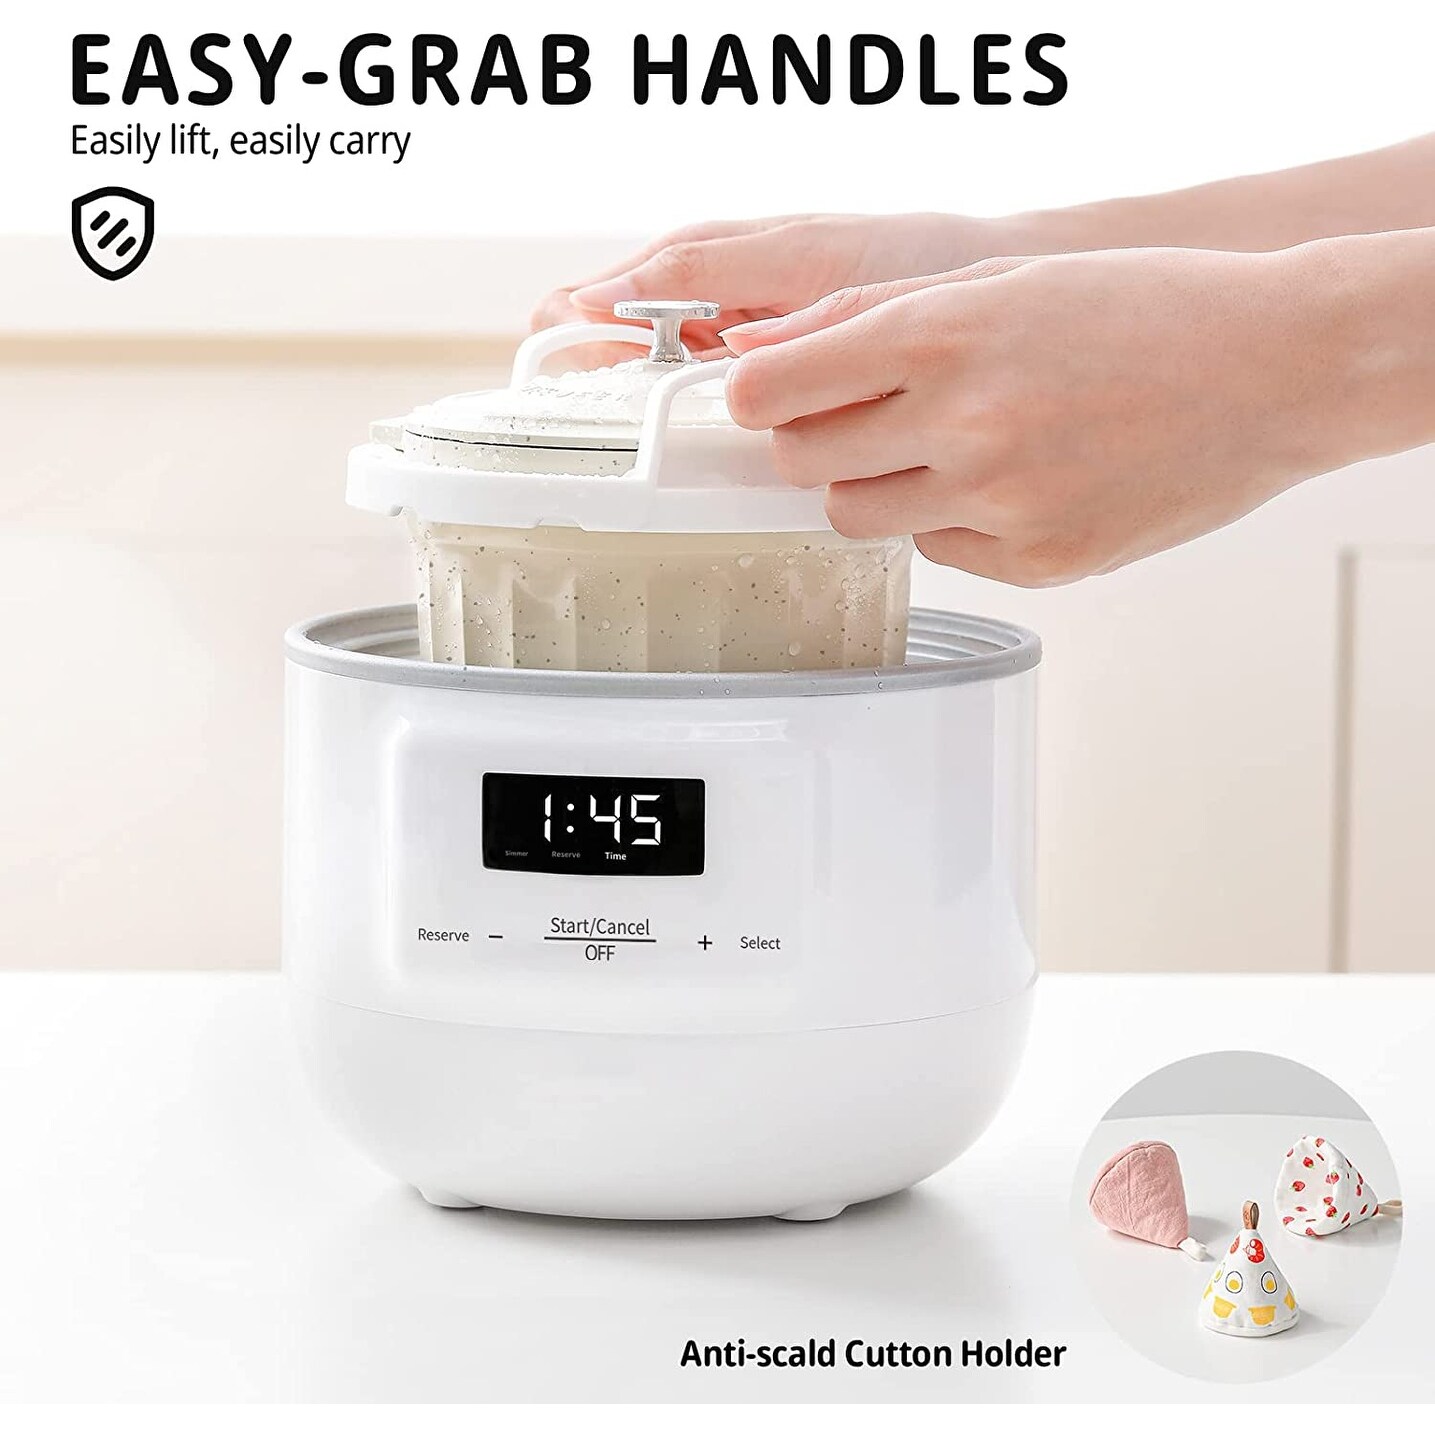 https://ak1.ostkcdn.com/images/products/is/images/direct/0397c884228bacfffca73dd4dad3561ccefaacf4/Slow-Cooker-White%2C-Small-Slow-cooker-1QT%2C-Smart-Appointment%2C-Ceramic-Interior-pot%2C-Automatic-Multi-function-Rice-Cooker.jpg